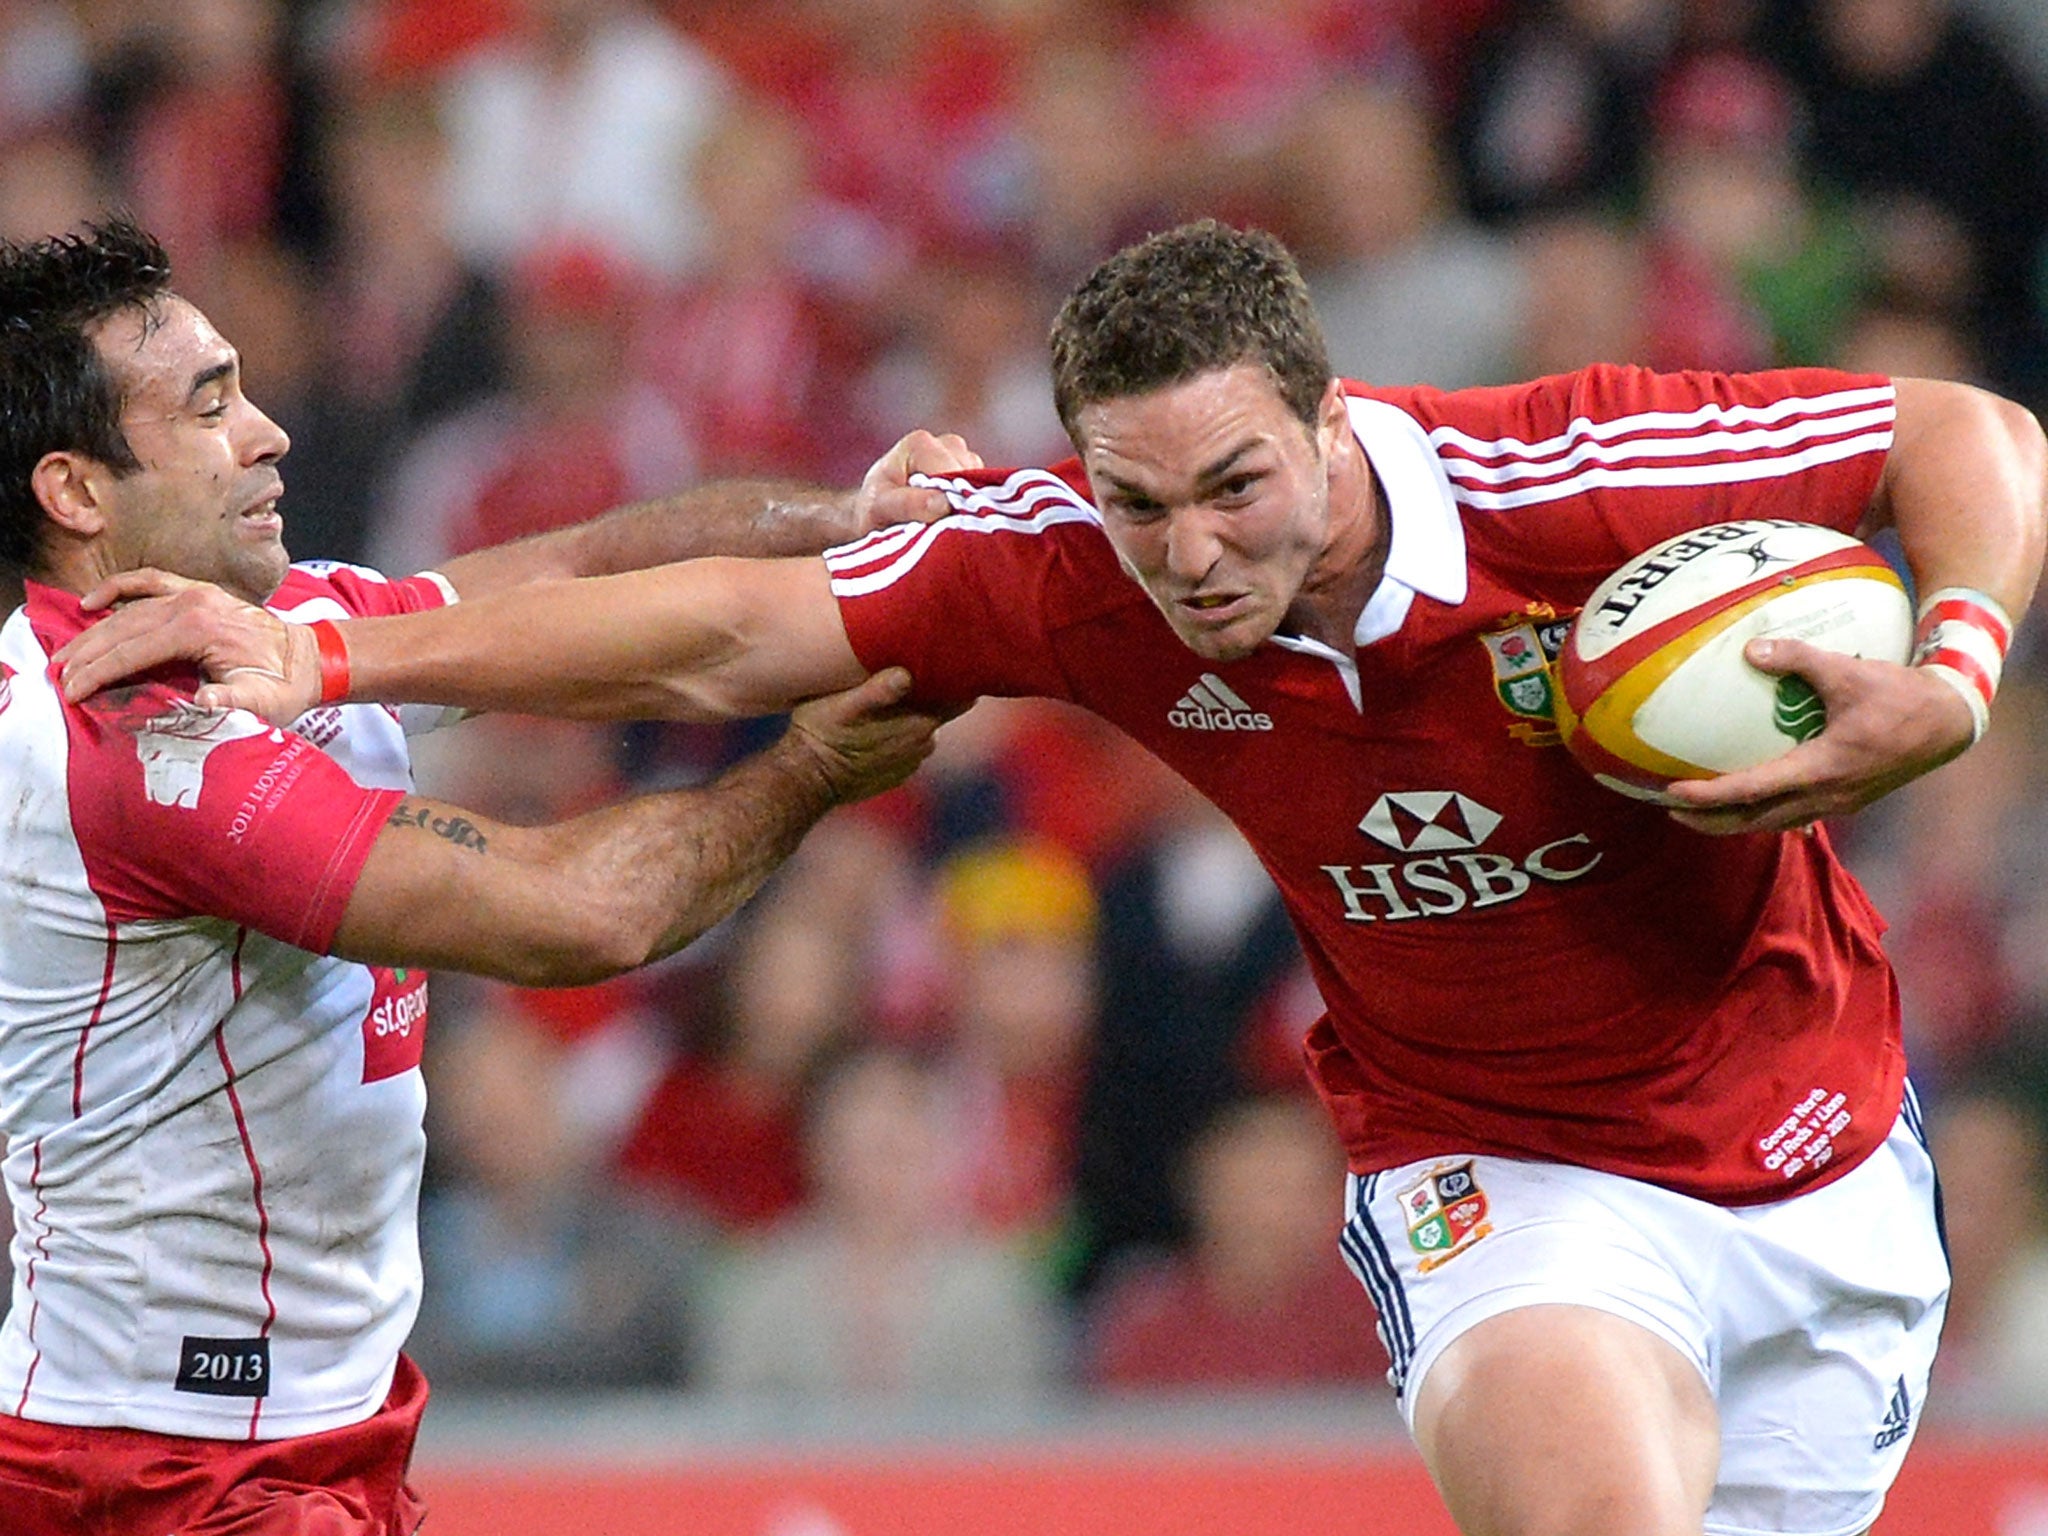 George North of the Lions pushes away from the defence during the match between the Queensland Reds and the British & Irish Lions